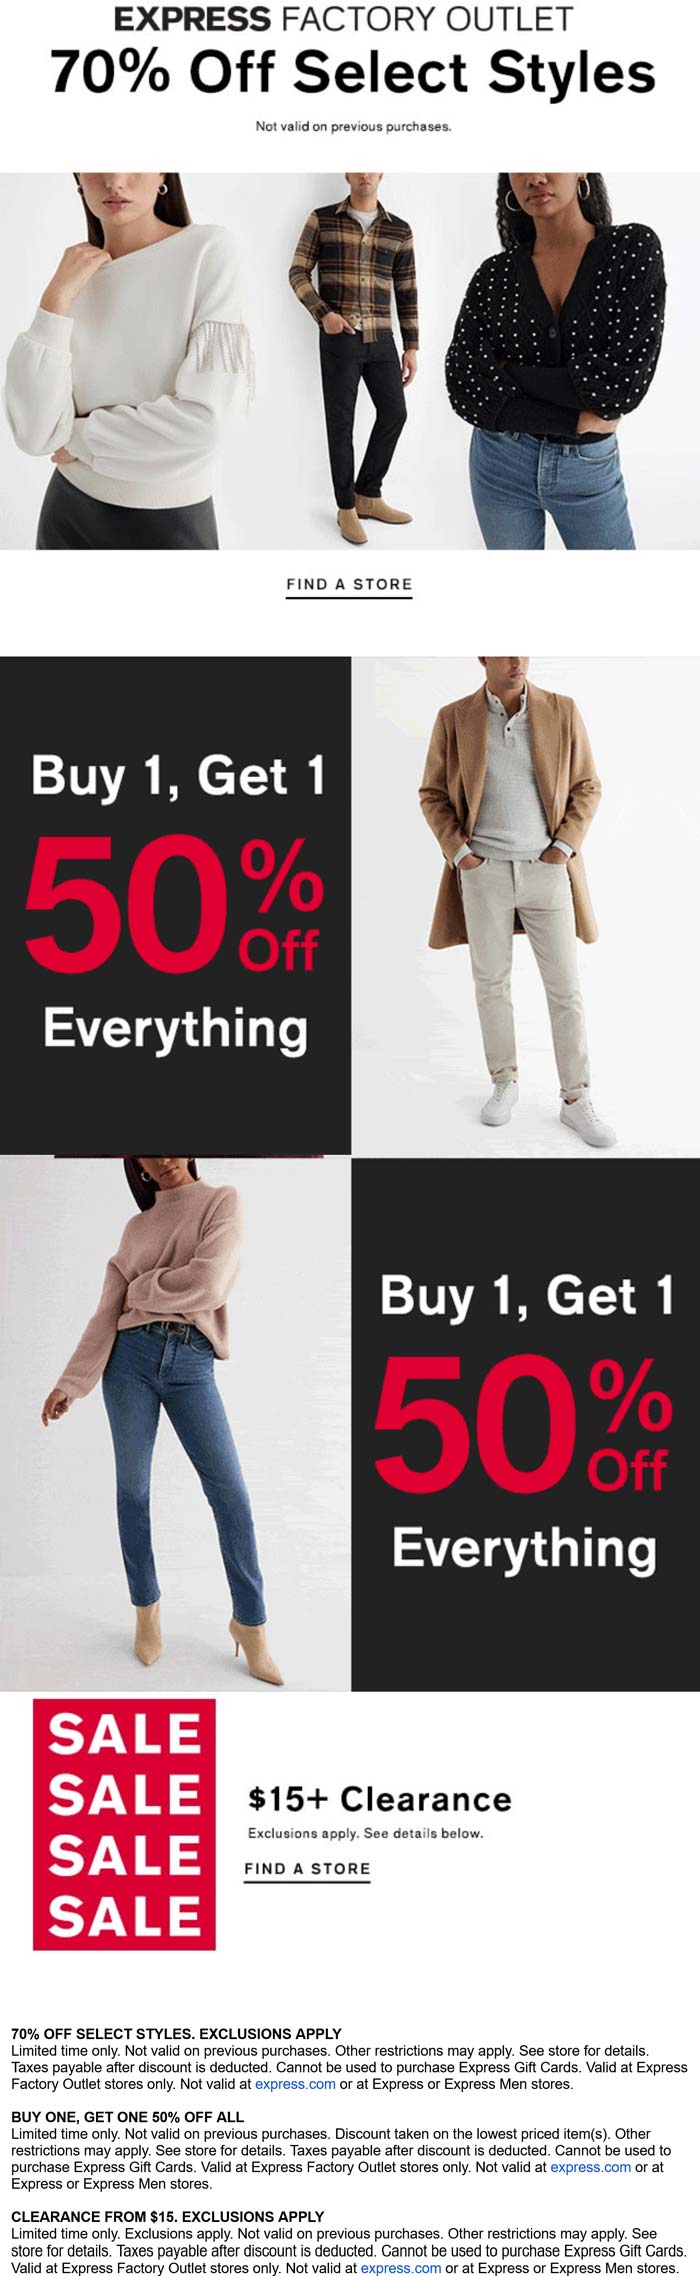 Express Factory Outlet stores Coupon  Second item 50% off on everything at Express Factory Outlet #expressfactoryoutlet 